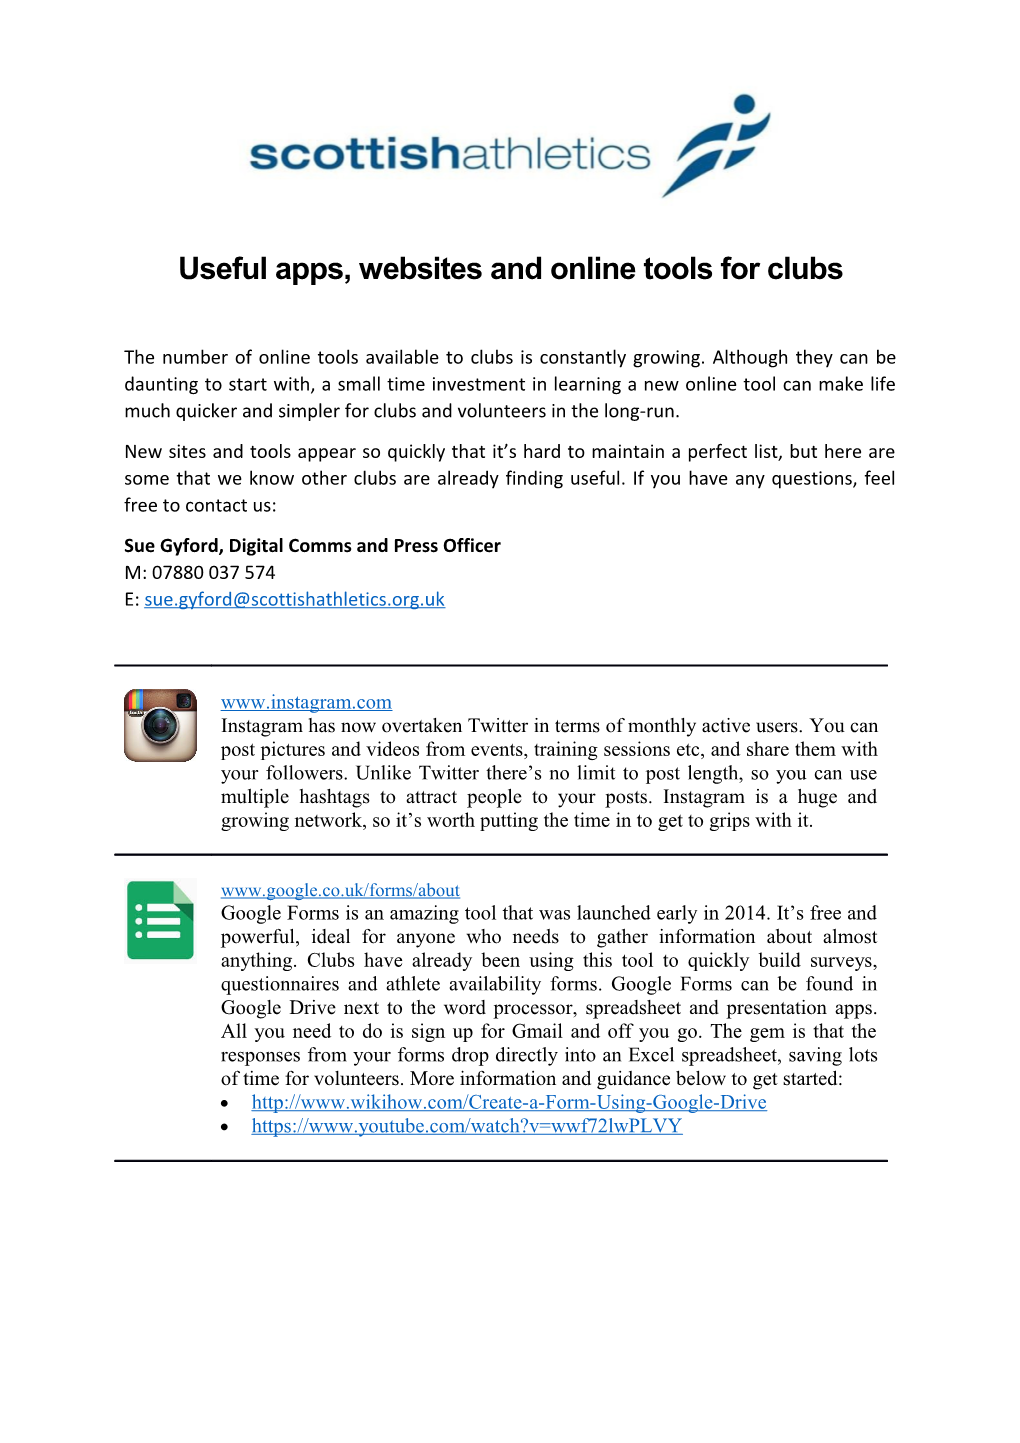 Useful Apps, Websites and Online Tools for Clubs